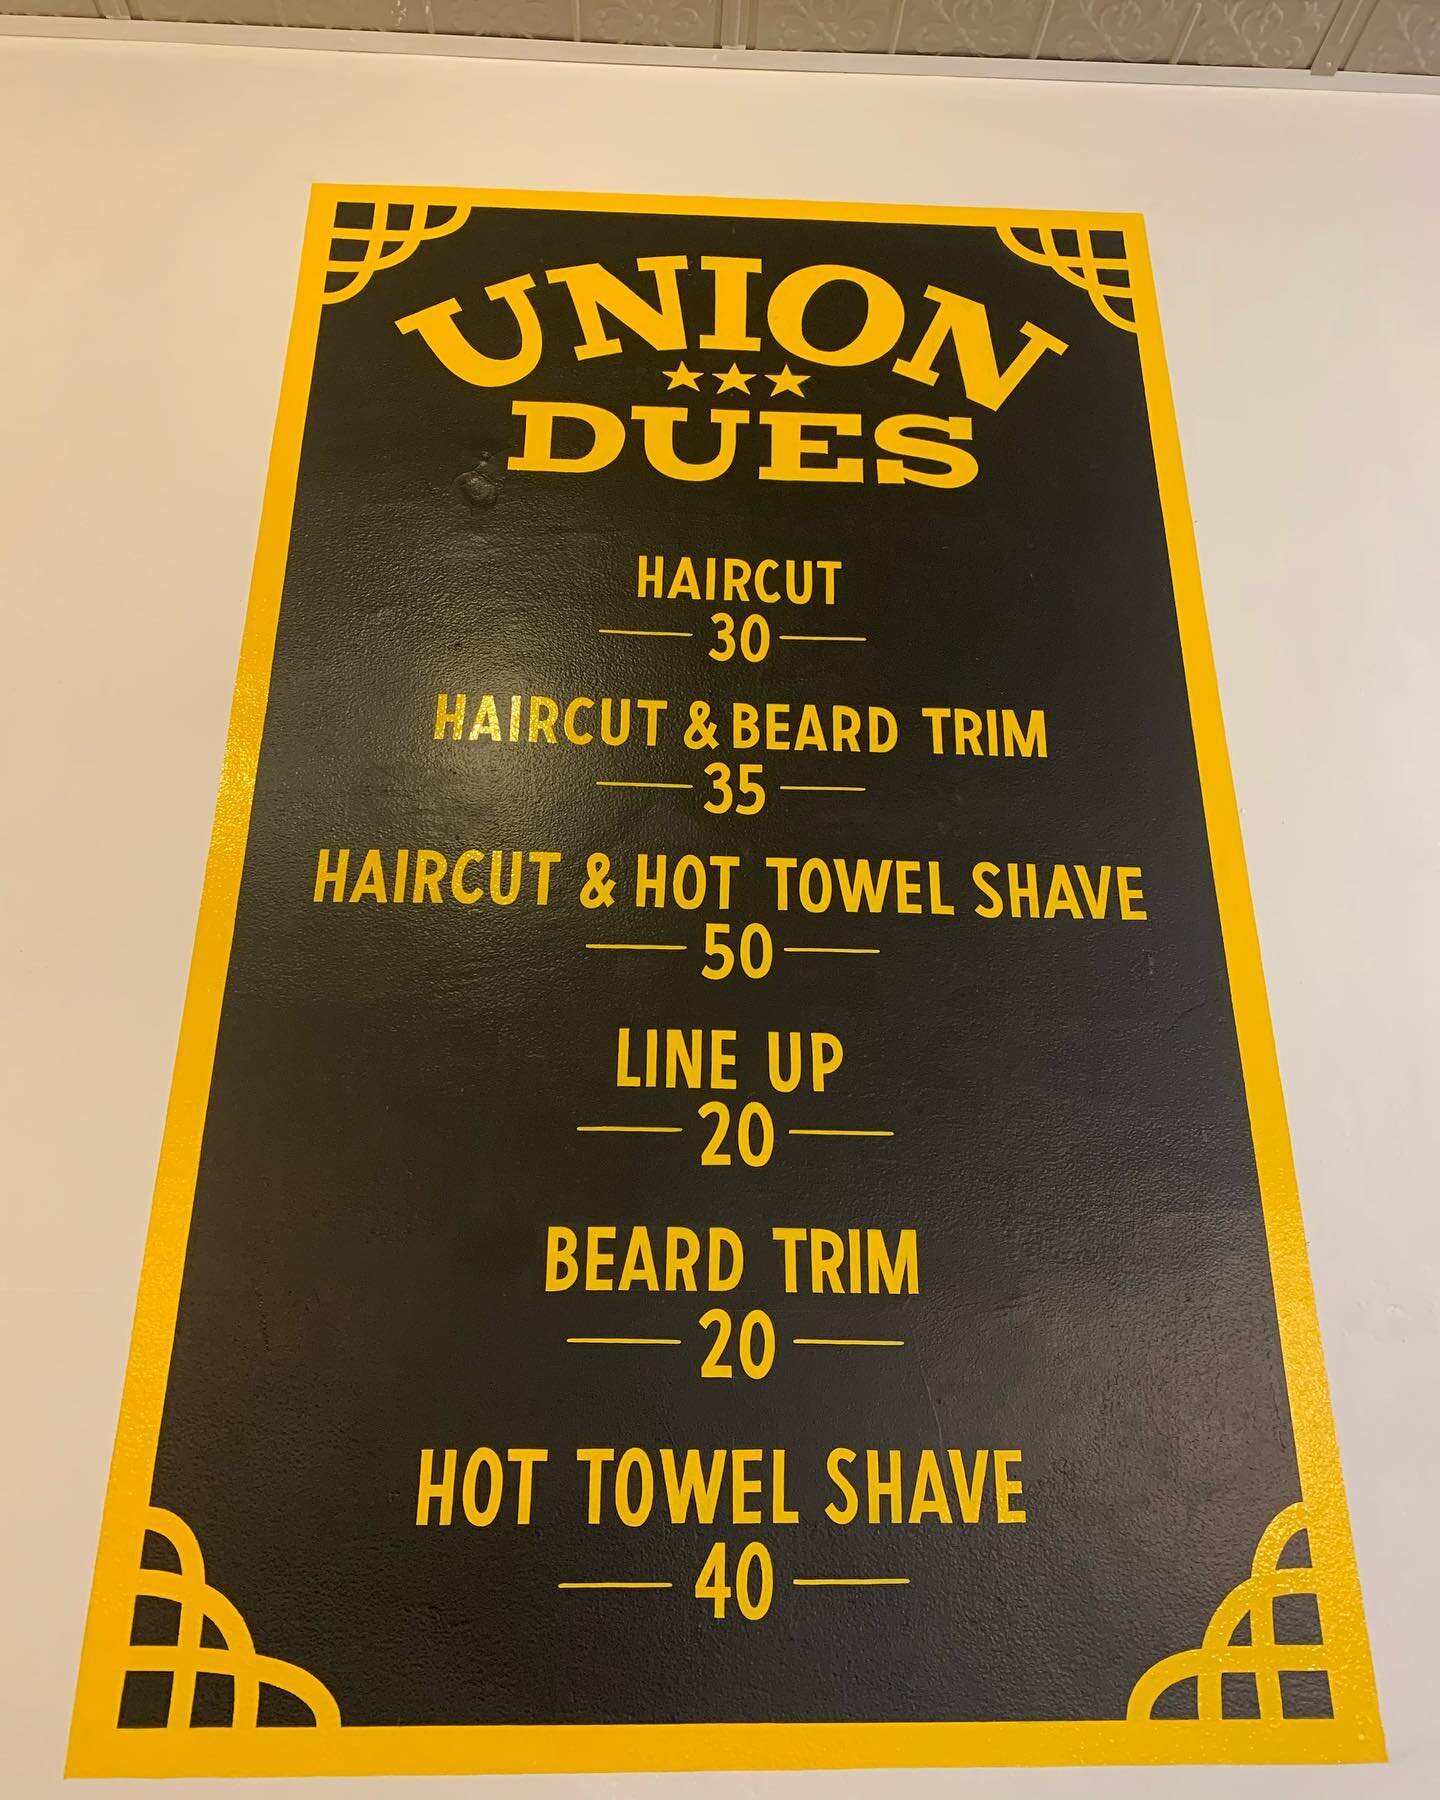 Shoutout to the homie @_andrewhurley for hooking up the price list this week on our wall. Master of his craft, go check out his work! #unionshave